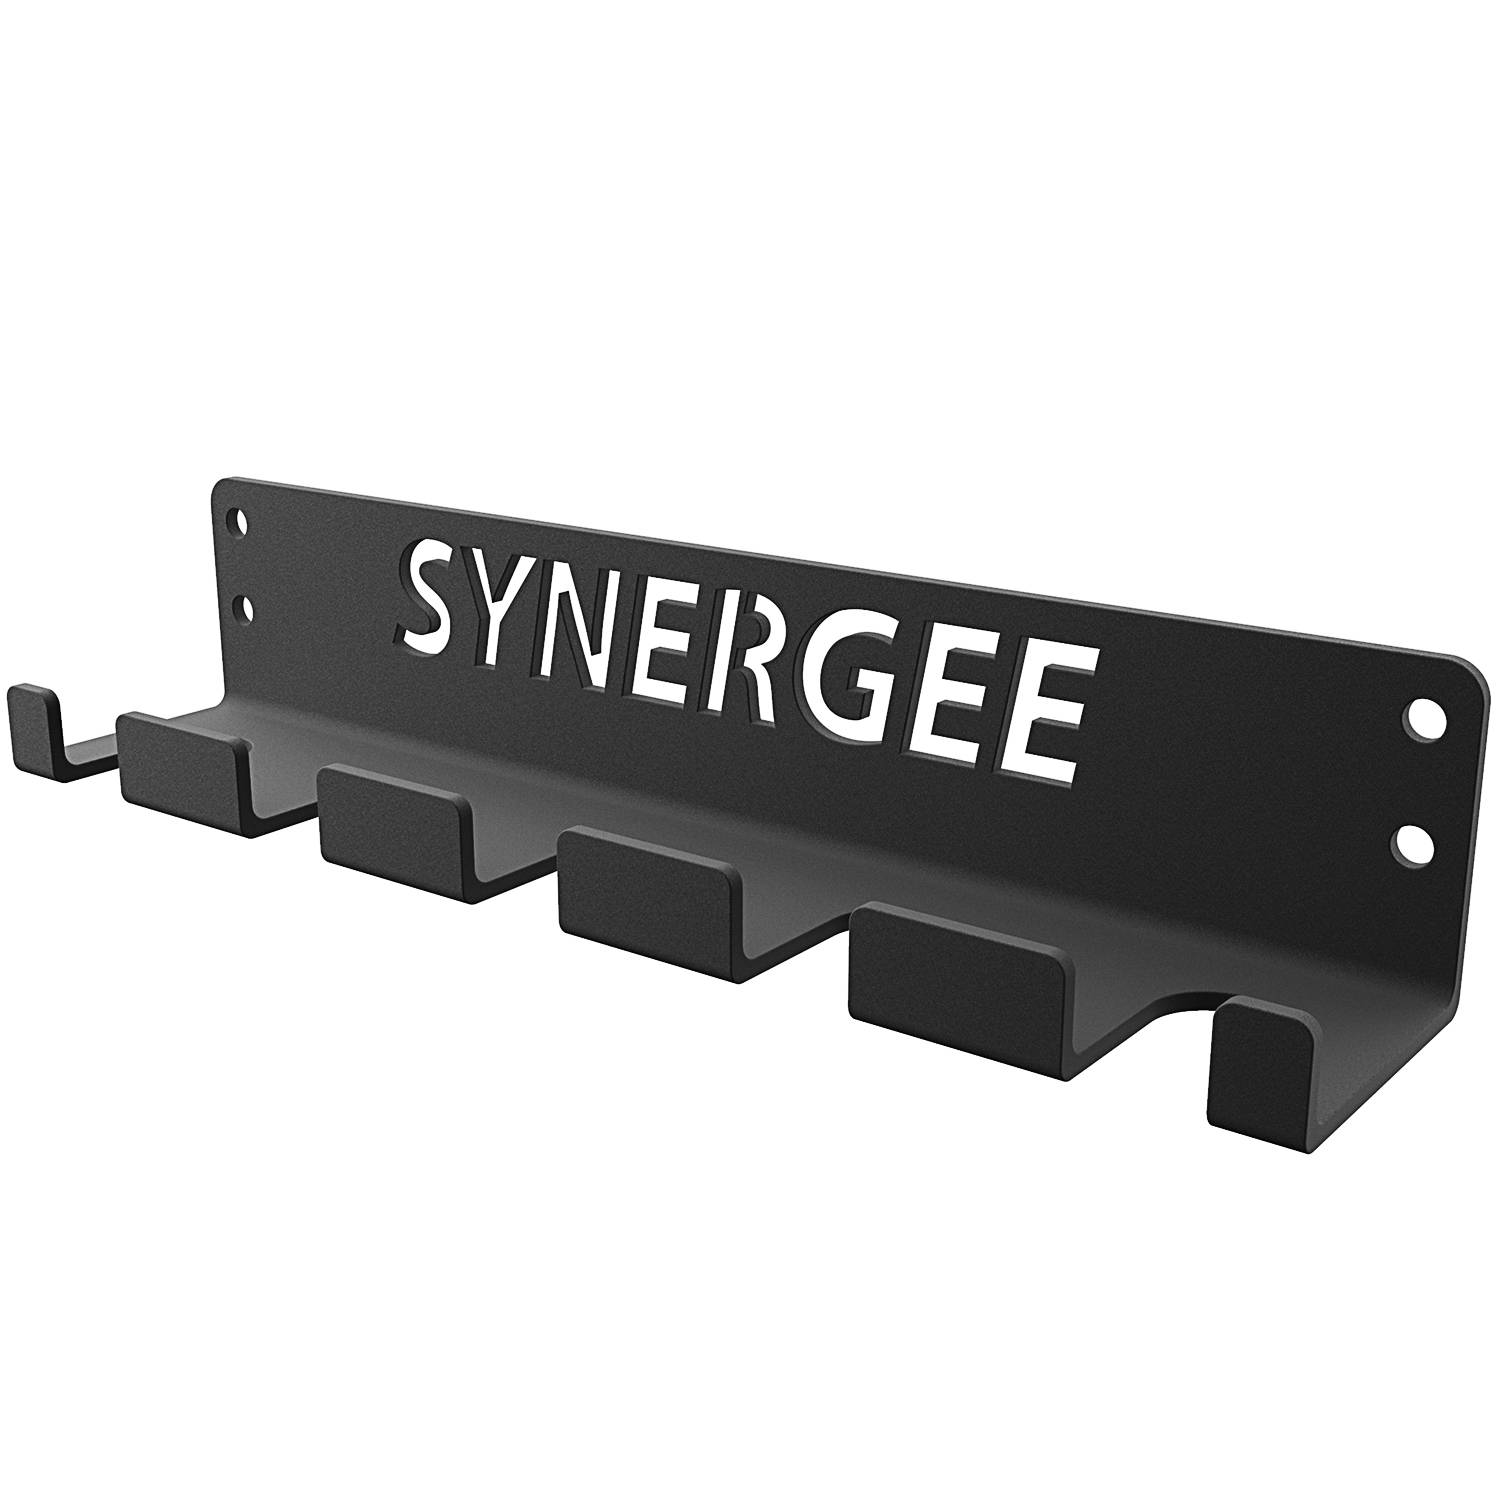 Synergee 1, 2 or 5 Barbell Holder